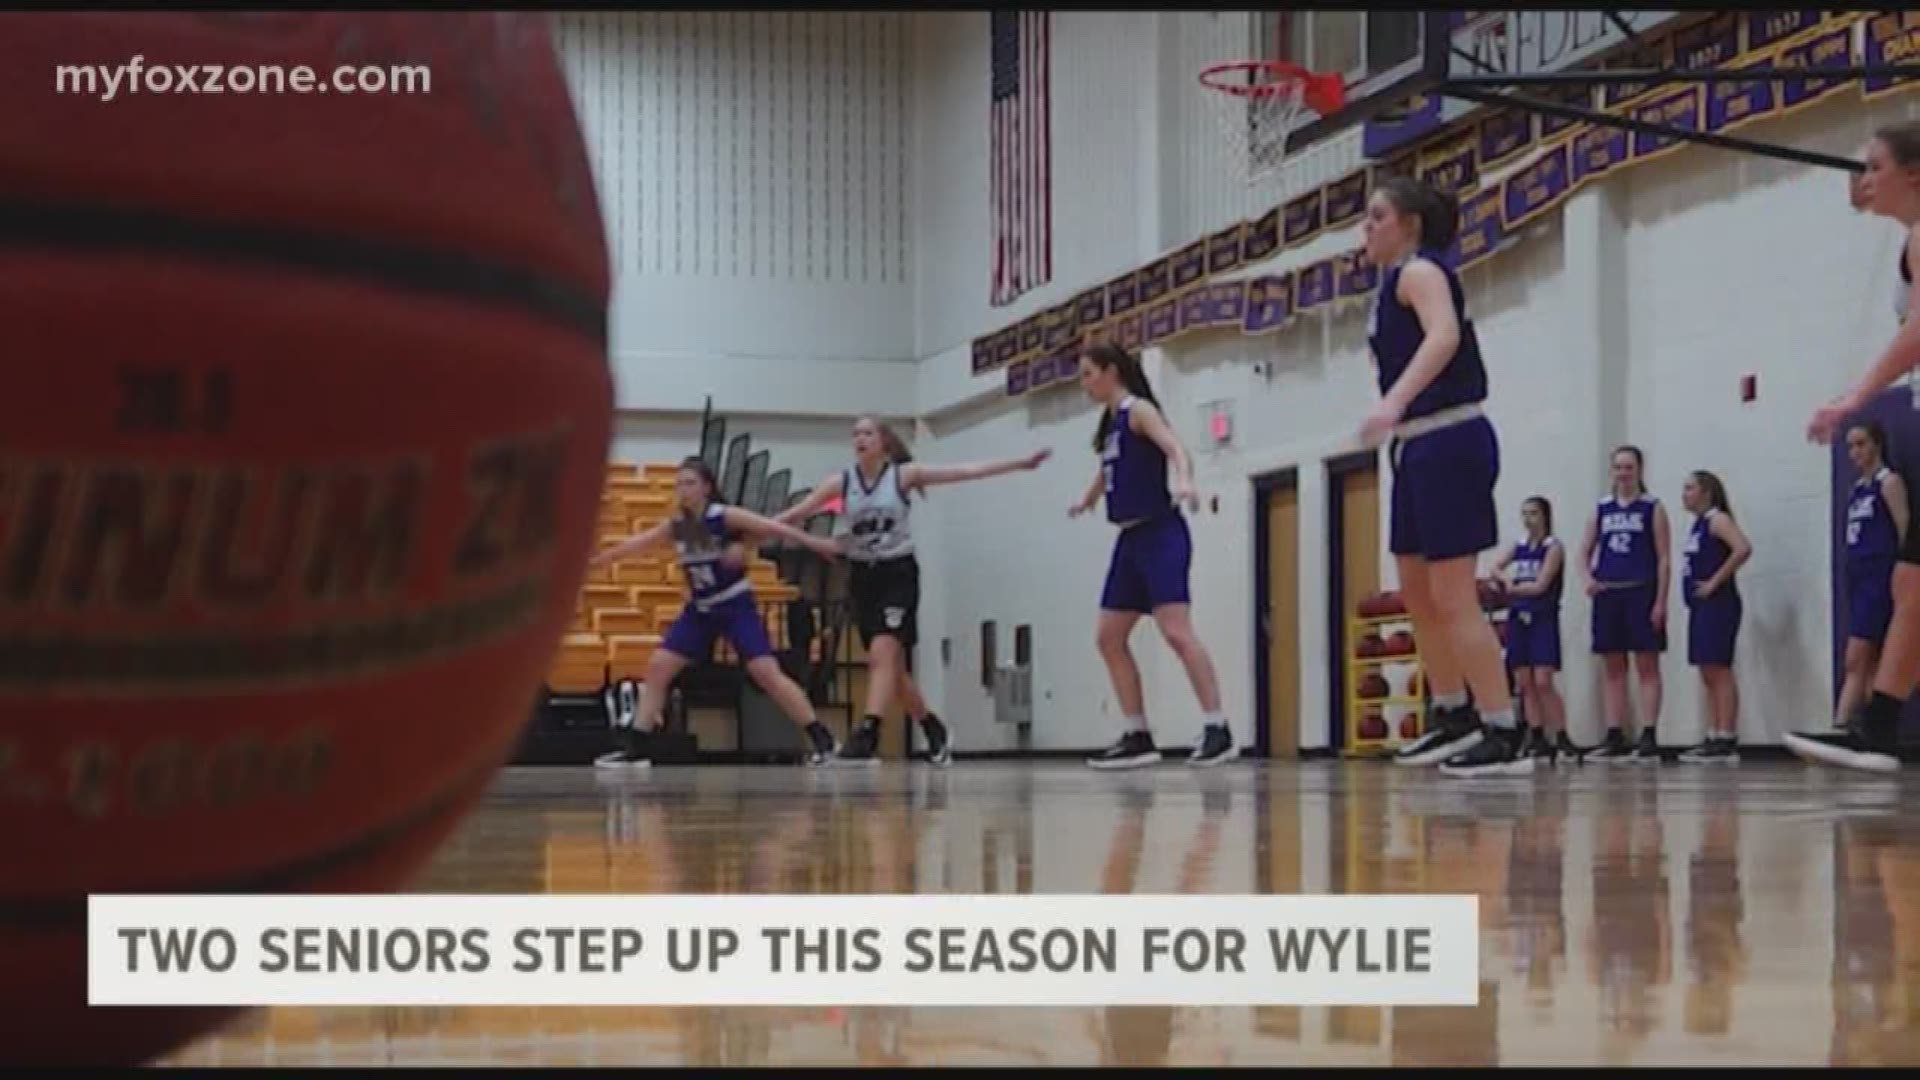 With 9 seniors graduating last season, the two returning varsity players are making an impact